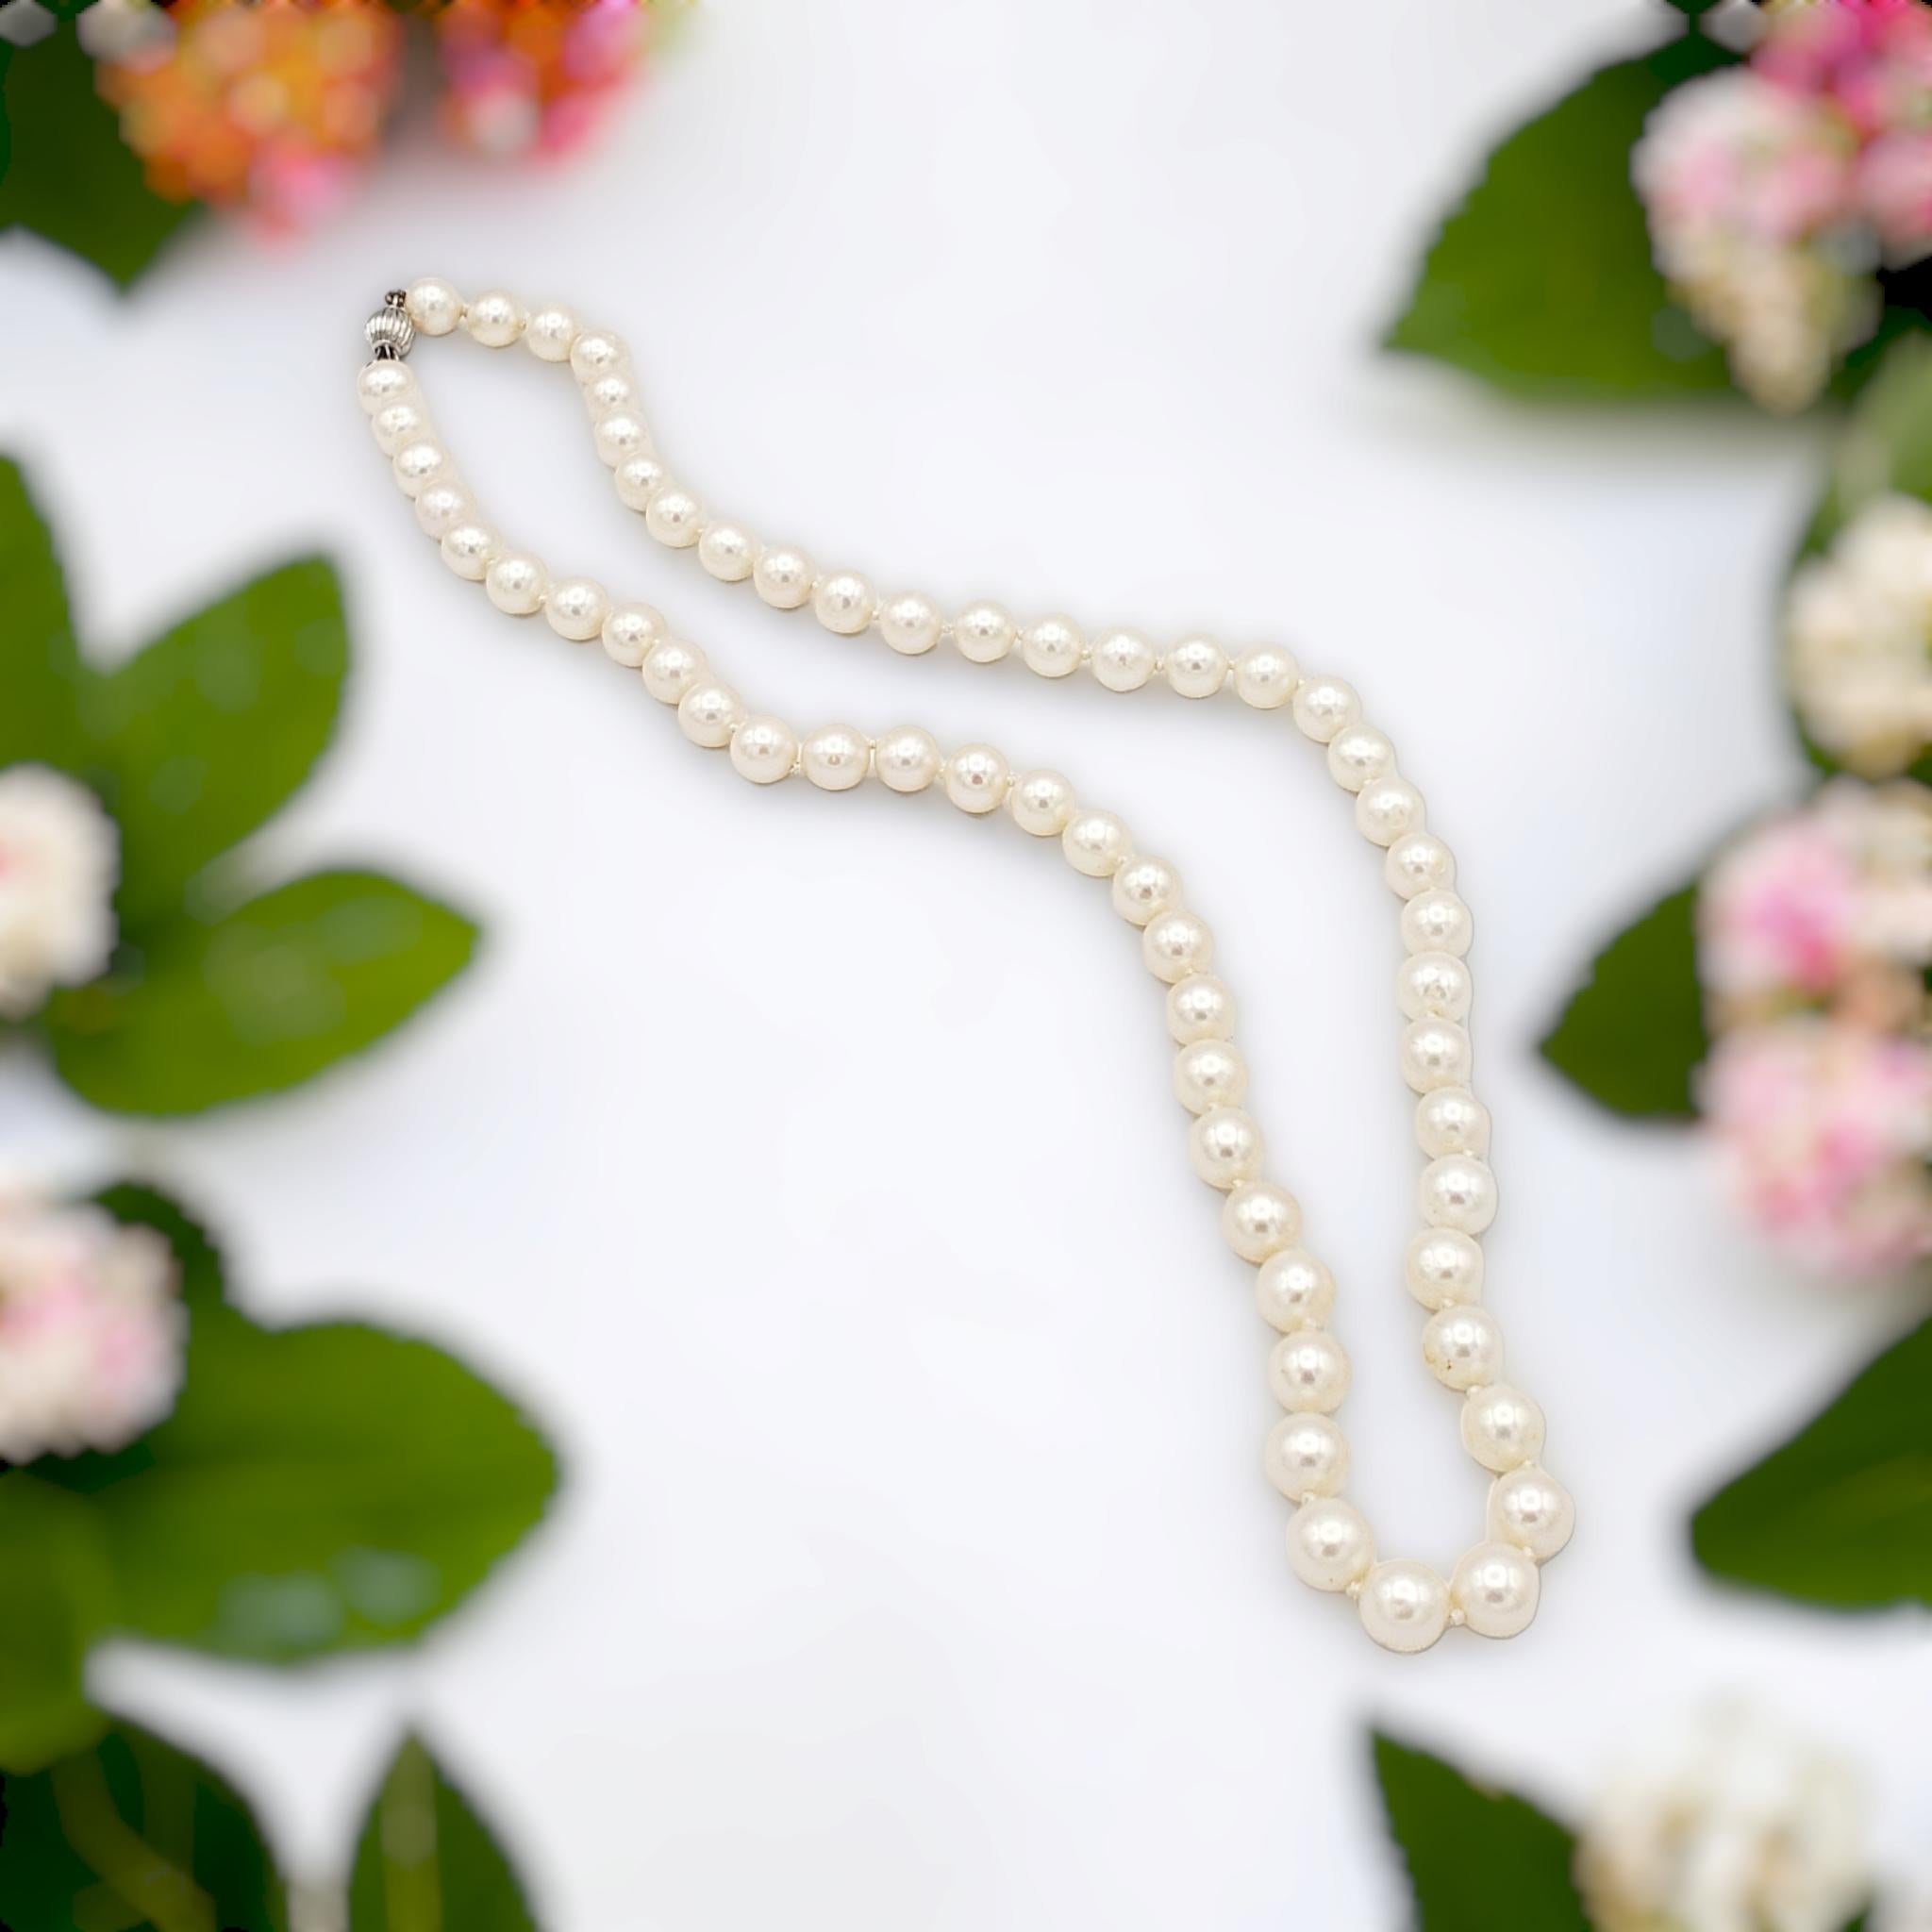 NEW Certified AA+ Quality Japanese Akoya Salt Water White Pearl Necklace For Sale 10